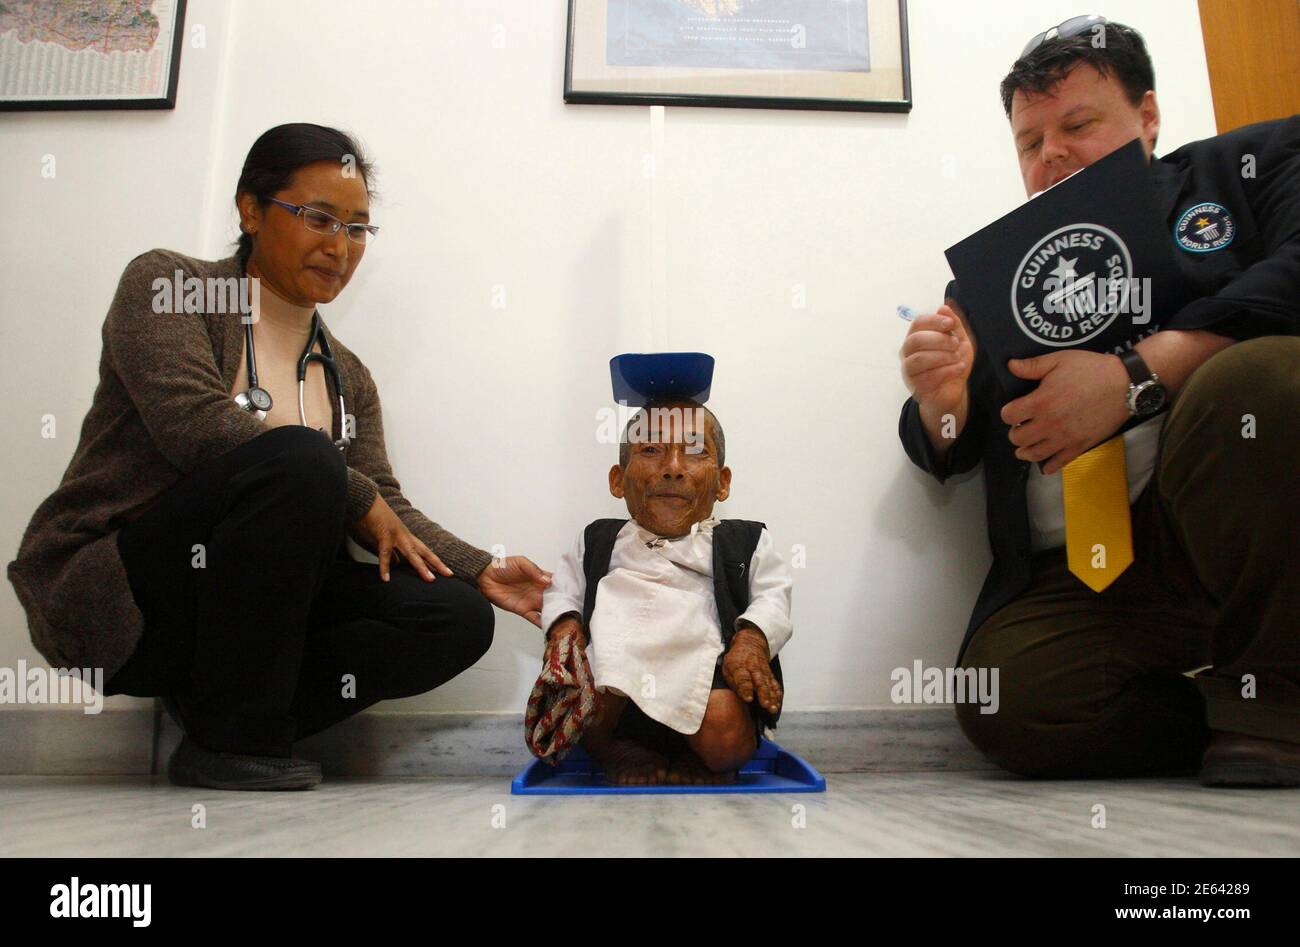 Chandra Bahadur Dangi, 72, who claims to be the world's shortest man  standing at a height of 22 inches (56 centimeters), is measured by the  Editor-in-Chief of Guinness World Record Craig Glenday (